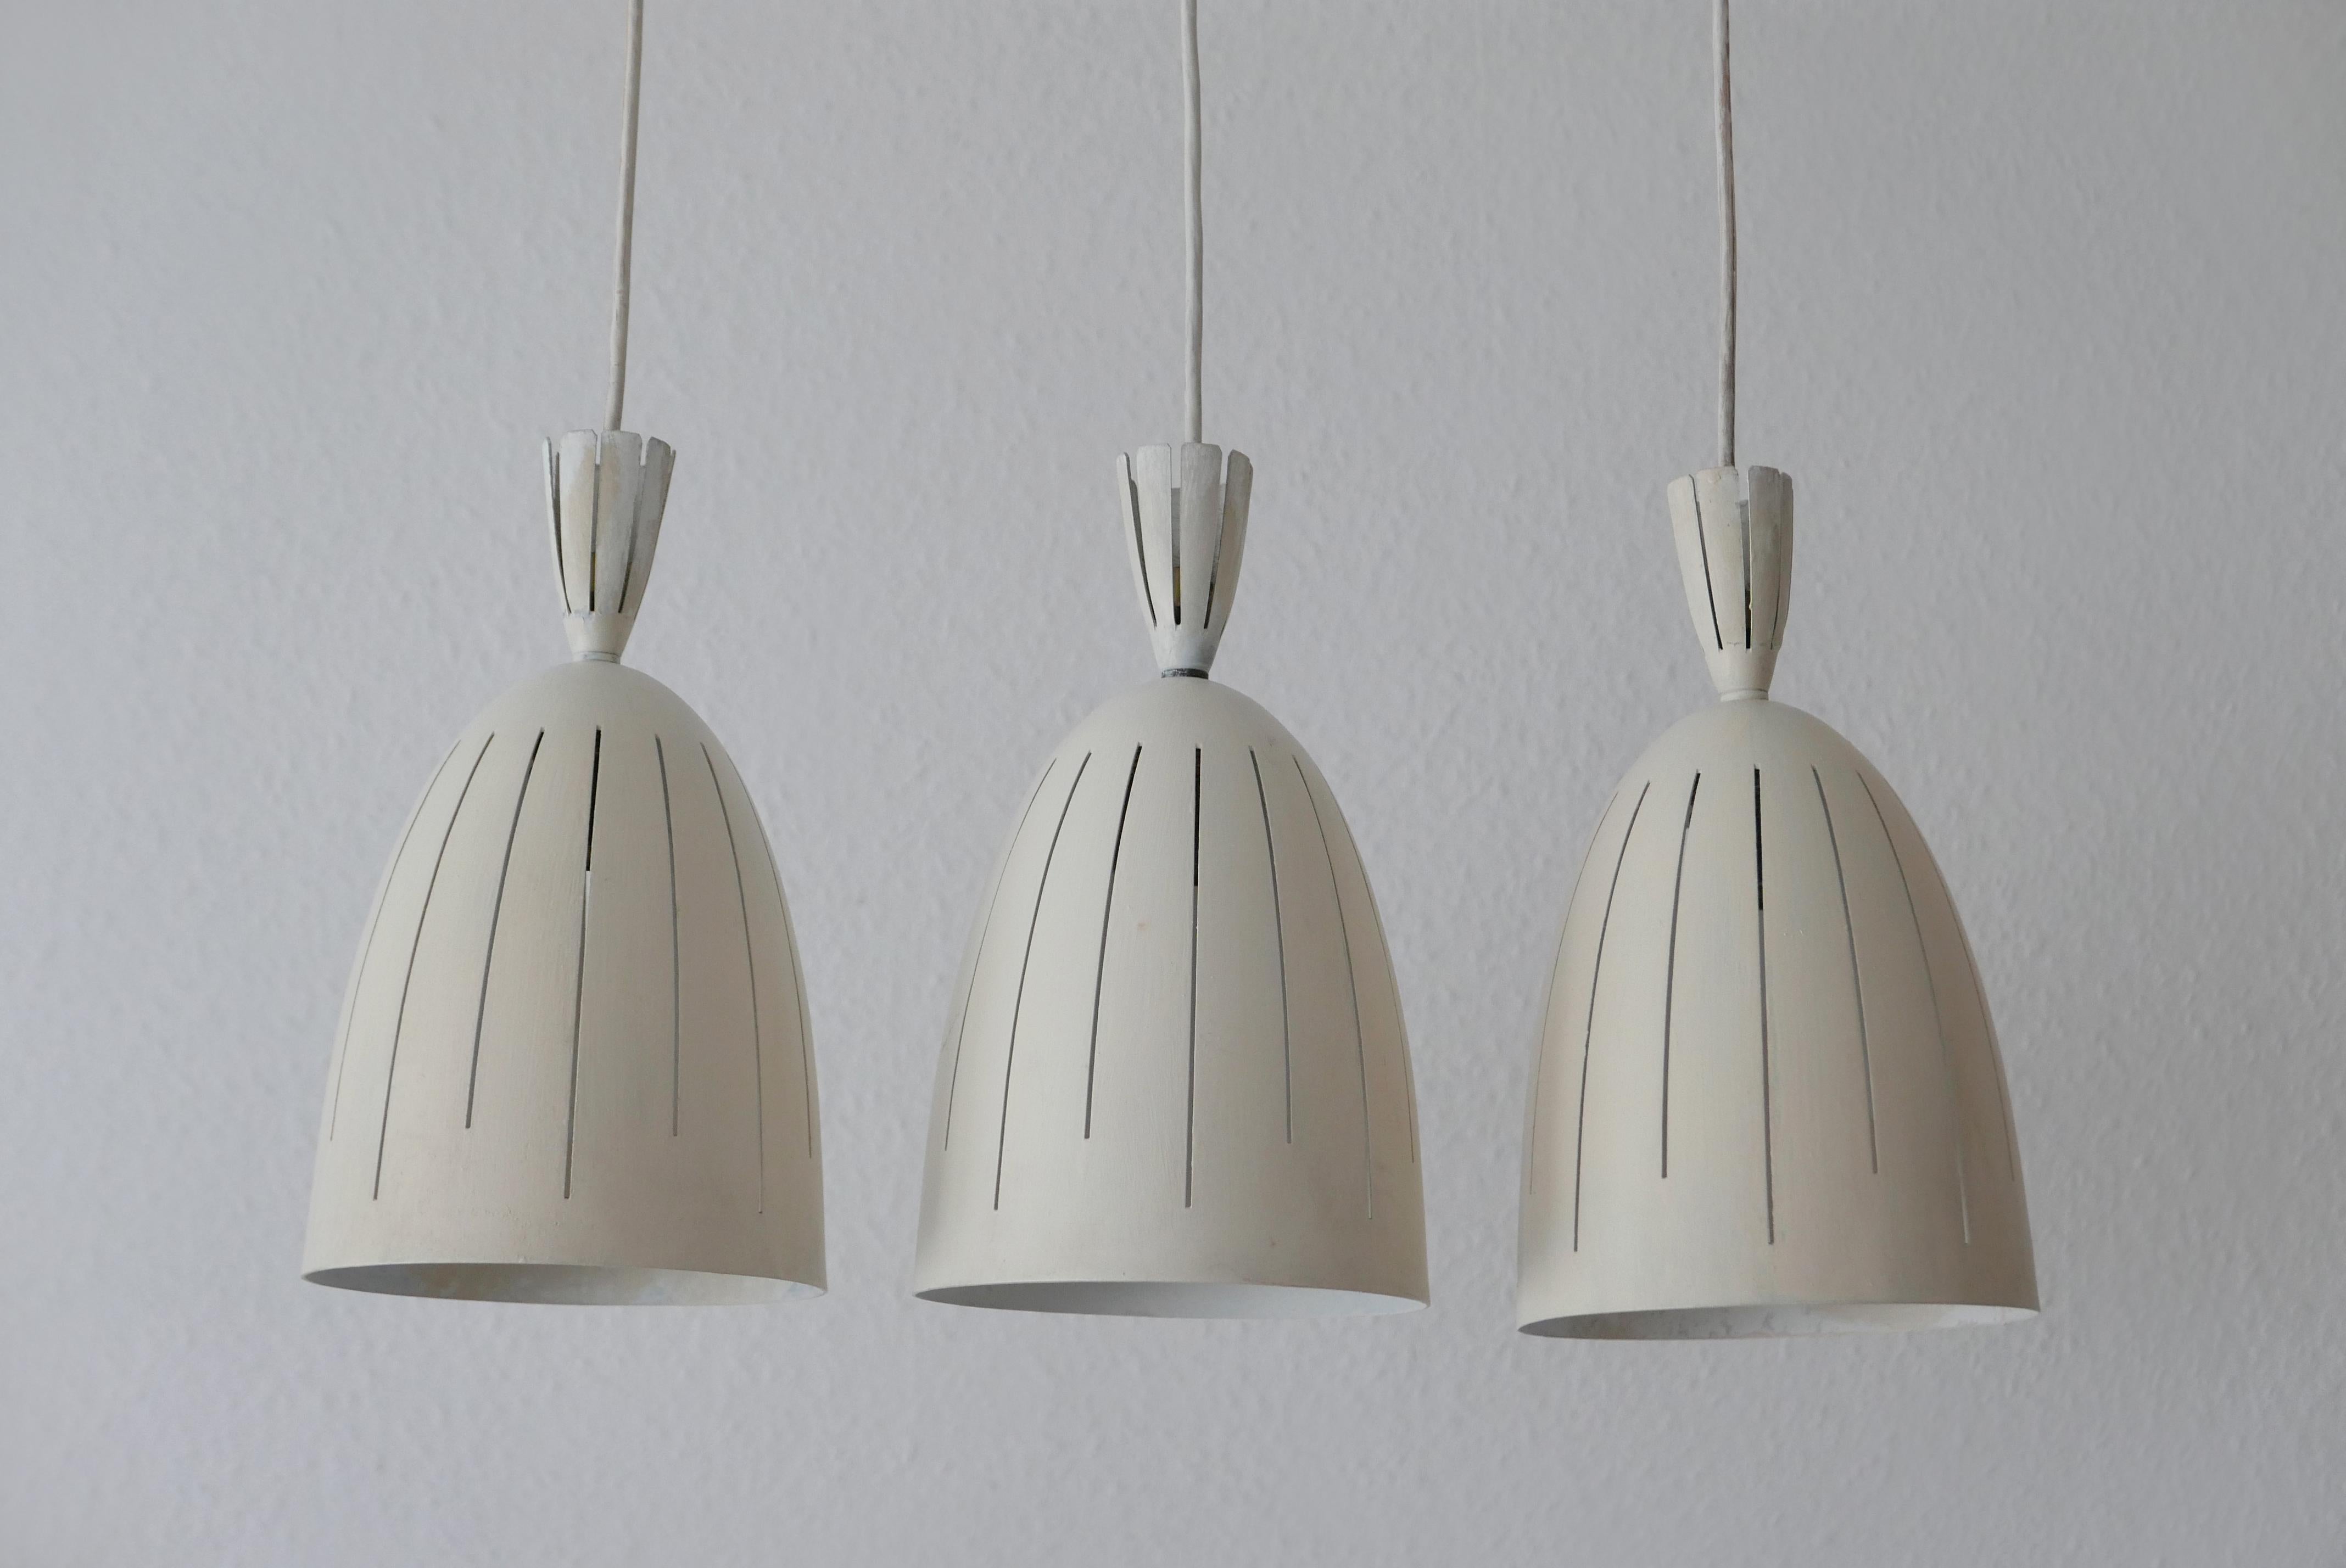 Set of three extremely rare and elegant Mid-Century Modern diabolo pendant lamps. Designed and manufactured probably in 1950s, Germany.

Executed in perforated and lacquered aluminium. Each lamp needs 1 x E27 Edison screw fit bulb, is wired, and in